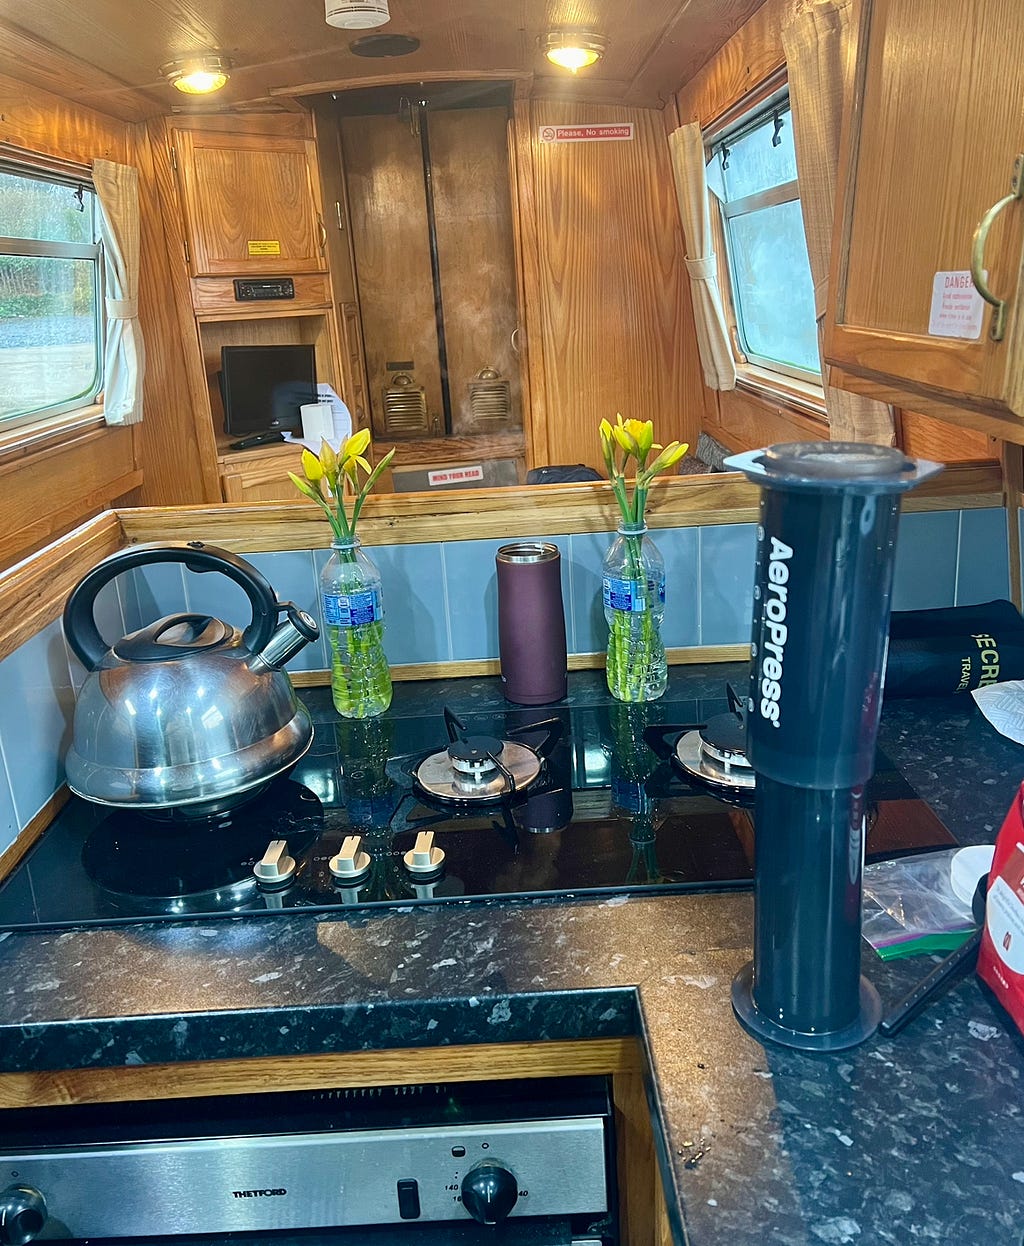 The galley aboard the narrow boat. Small but functional.